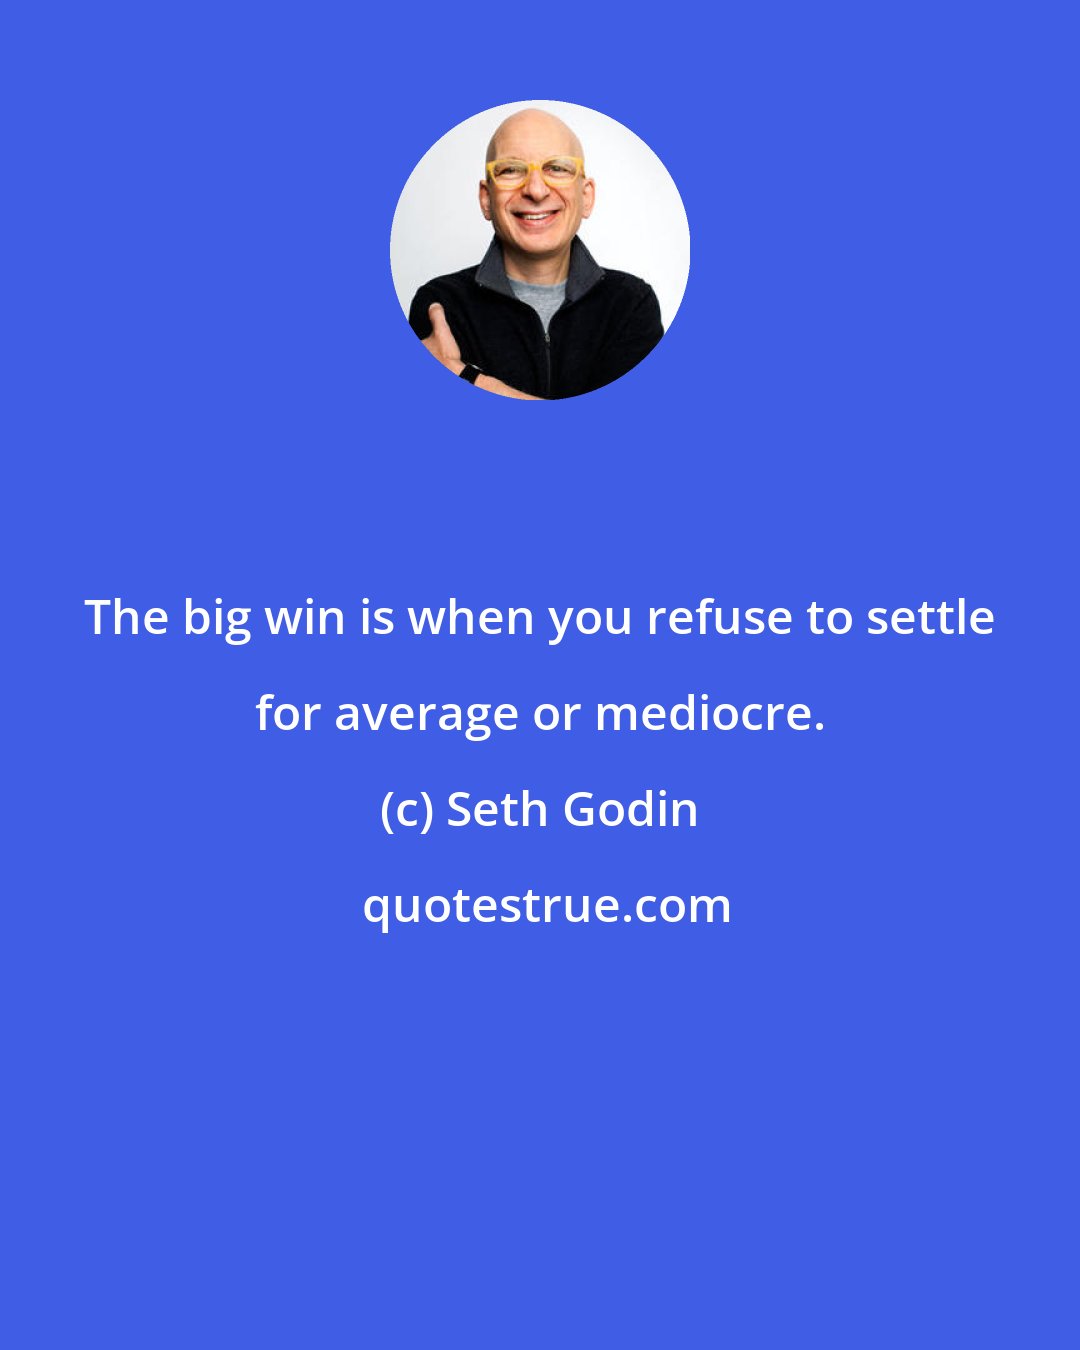 Seth Godin: The big win is when you refuse to settle for average or mediocre.